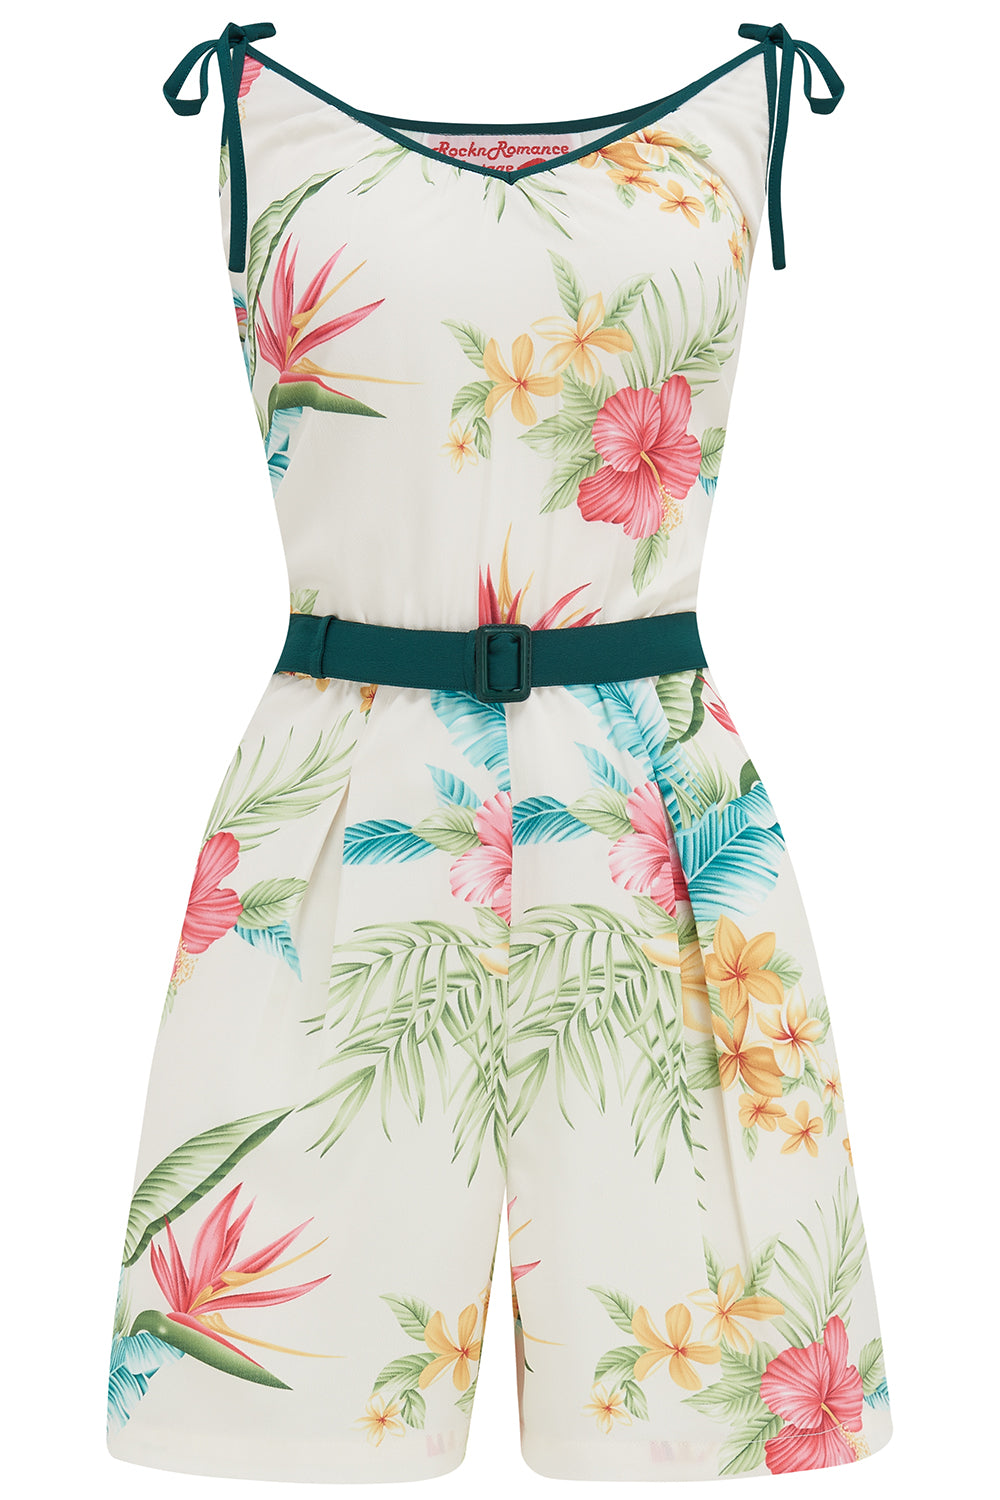 The "Marcie" Beach Playsuit / Romper in Natural Honolulu With Green Contrasts, True & Authentic 1950s Vintage Style